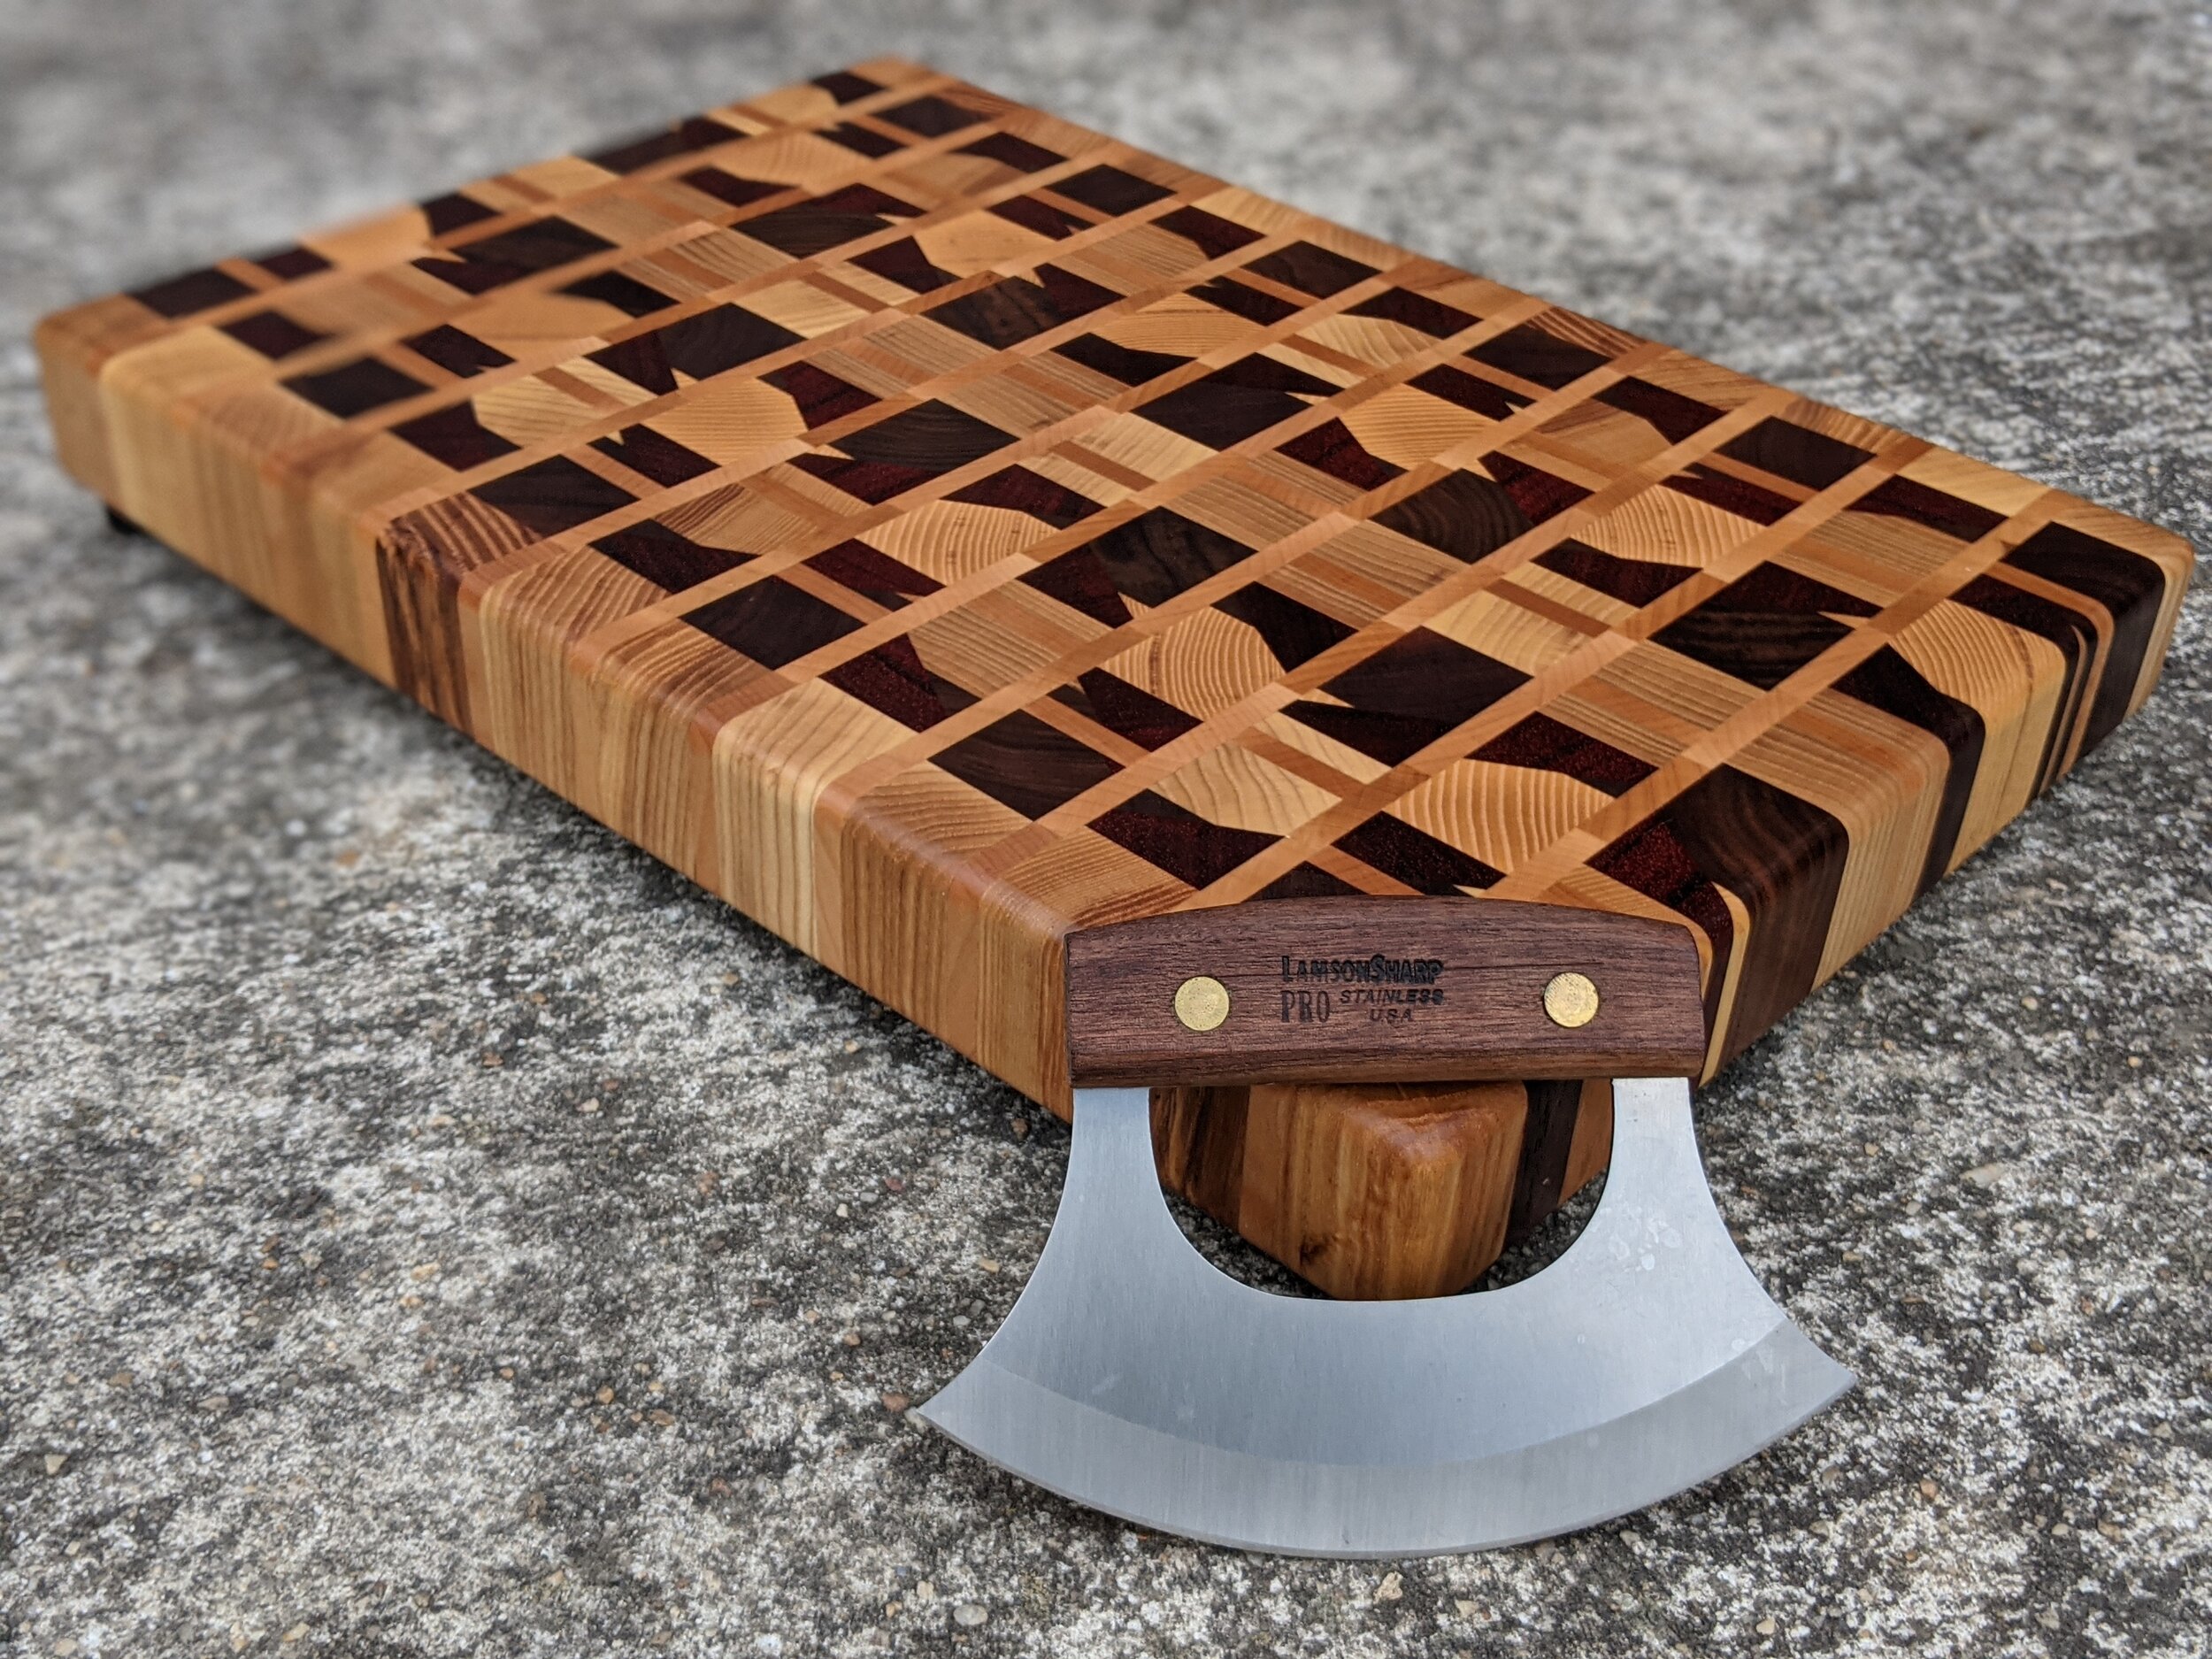 Cheungs Wood and Metal Cheese Grater on Cutting Board Decor